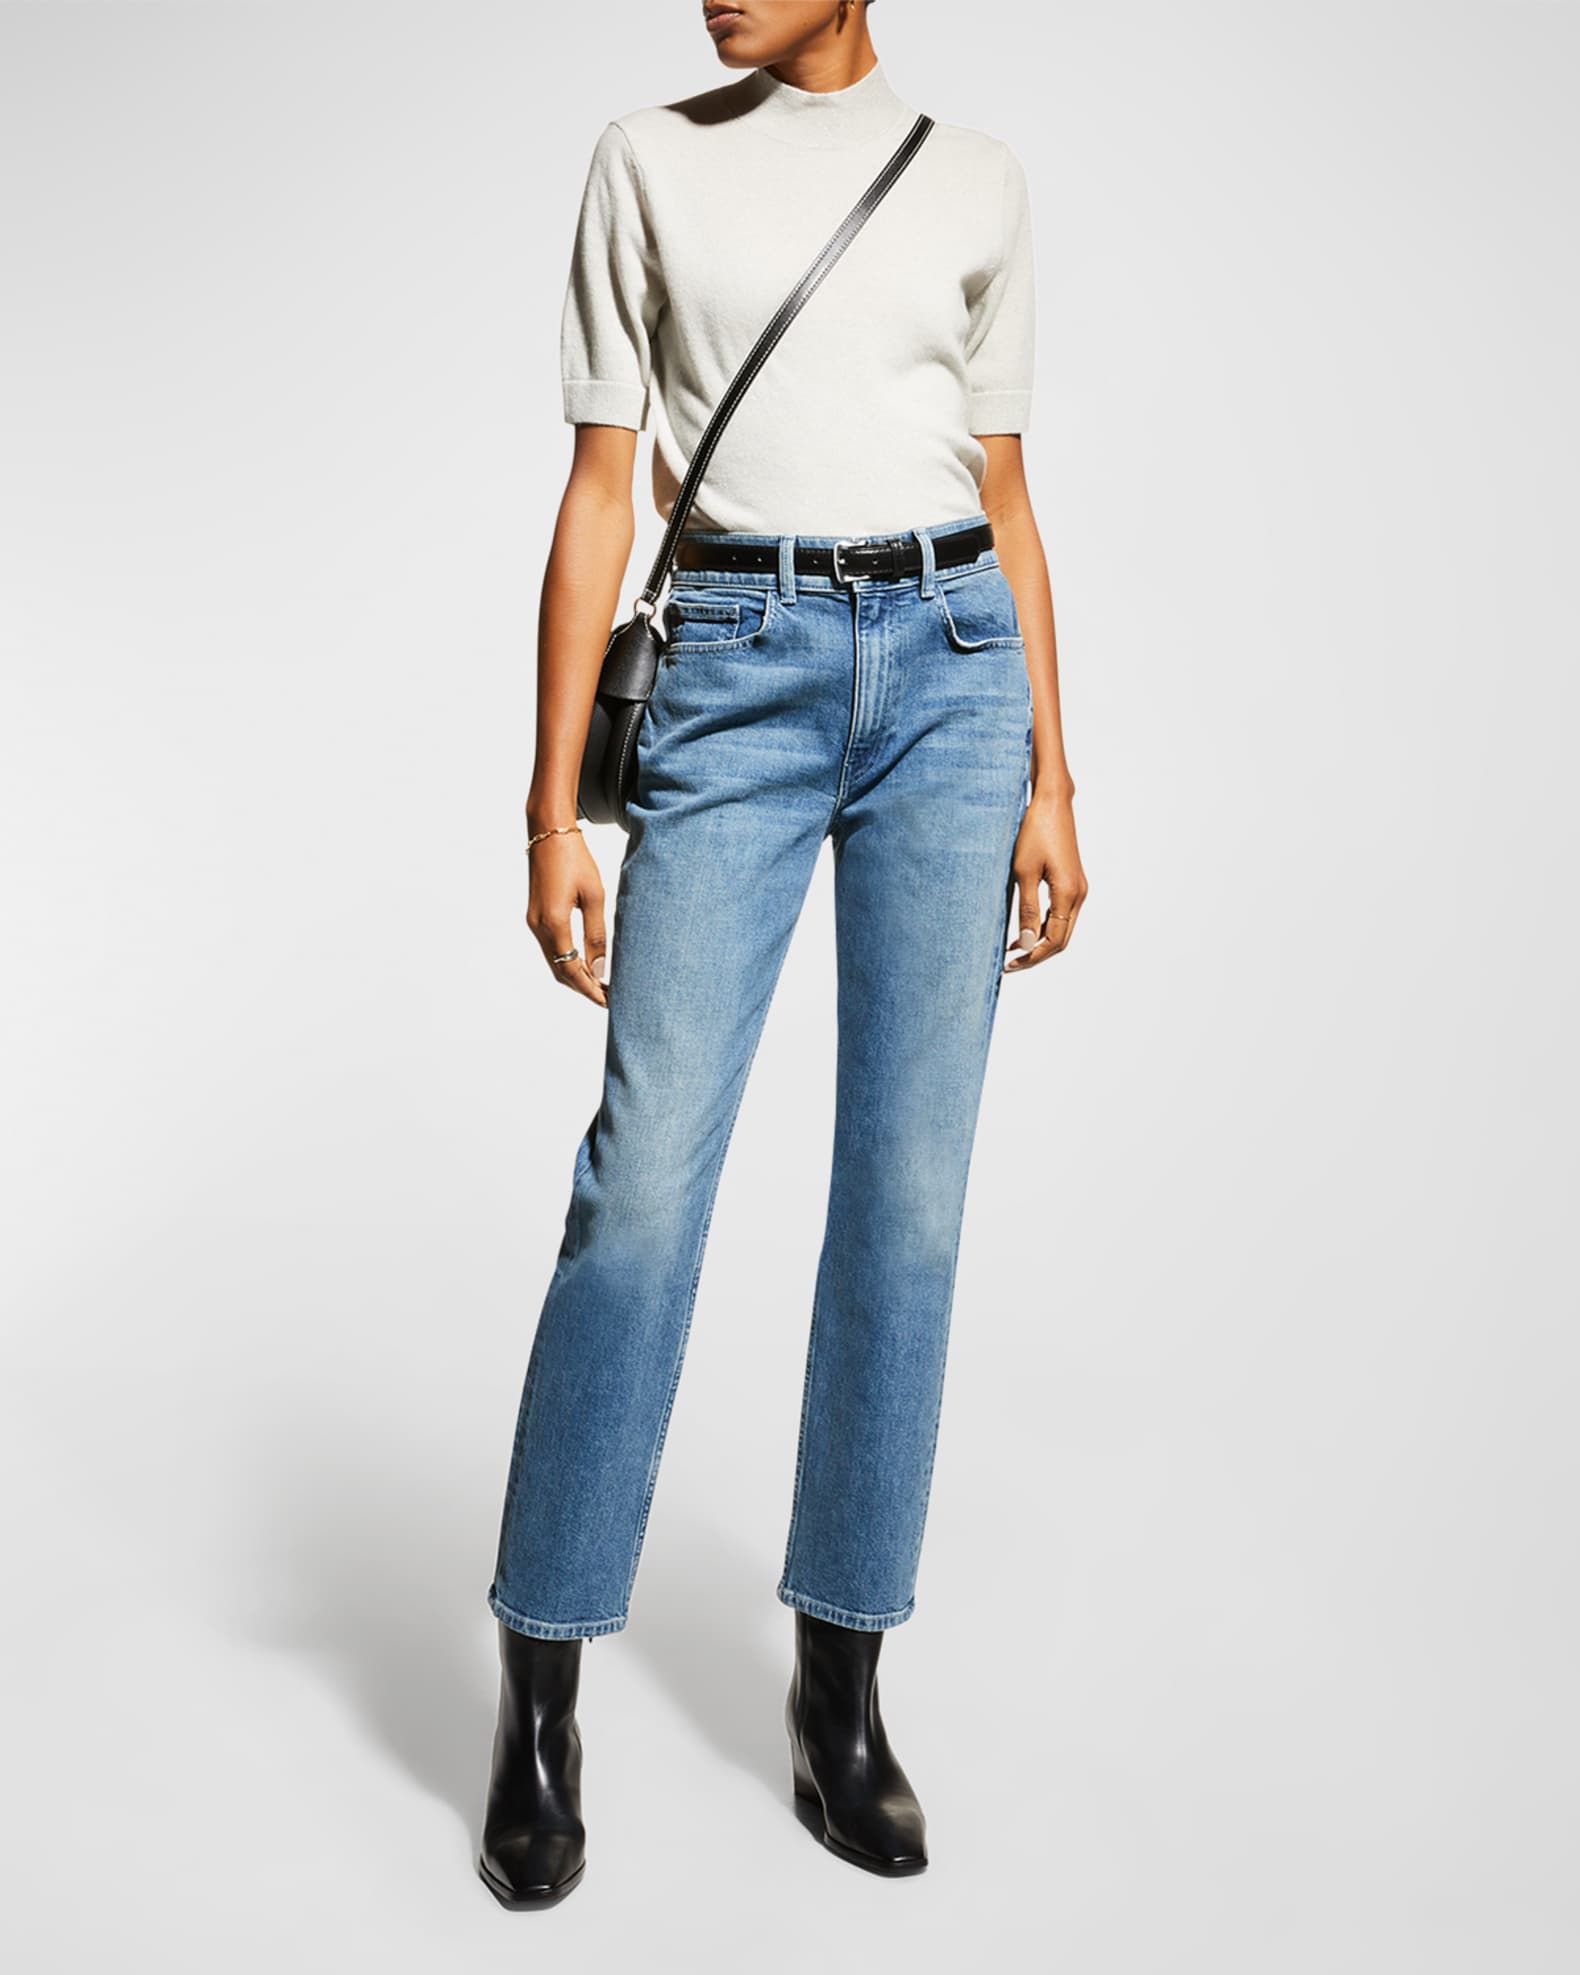 Lafayette 148 New York Reeve High Waist Straight Ankle Jeans